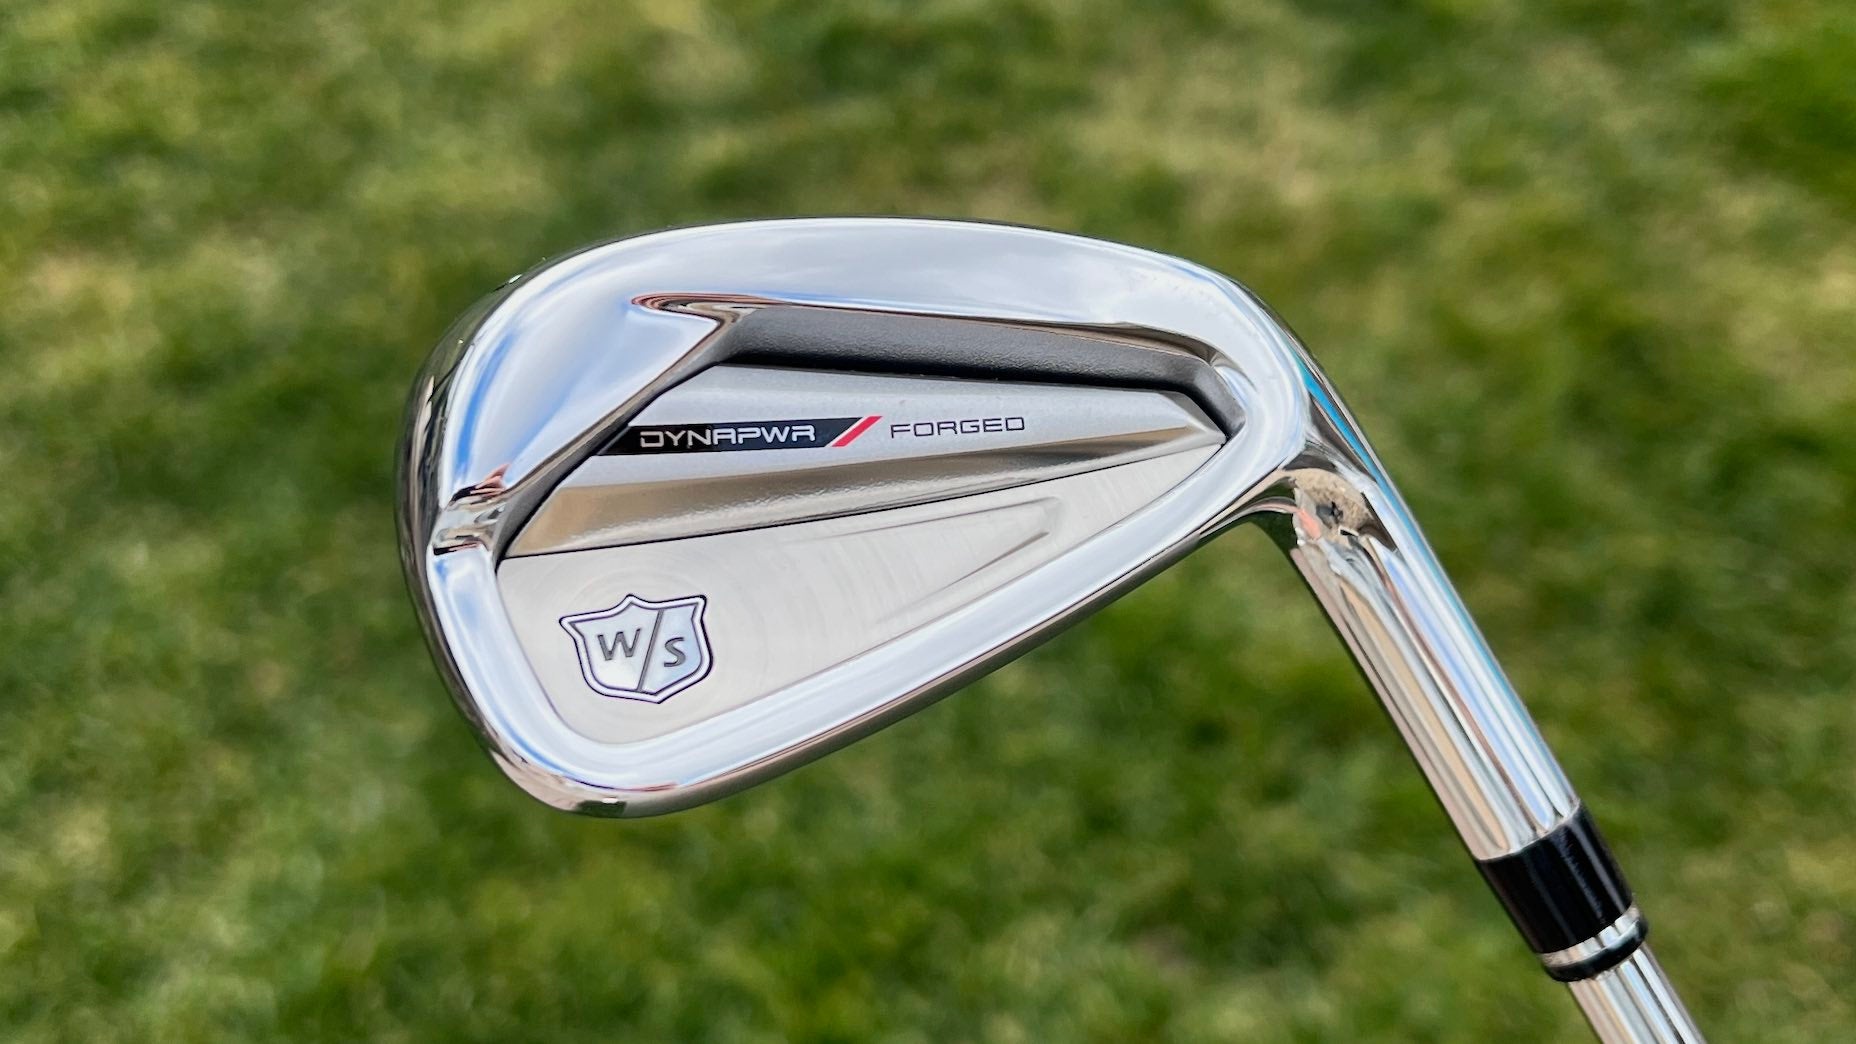 A single Wilson Dynapower forged iron pictured against a grass background